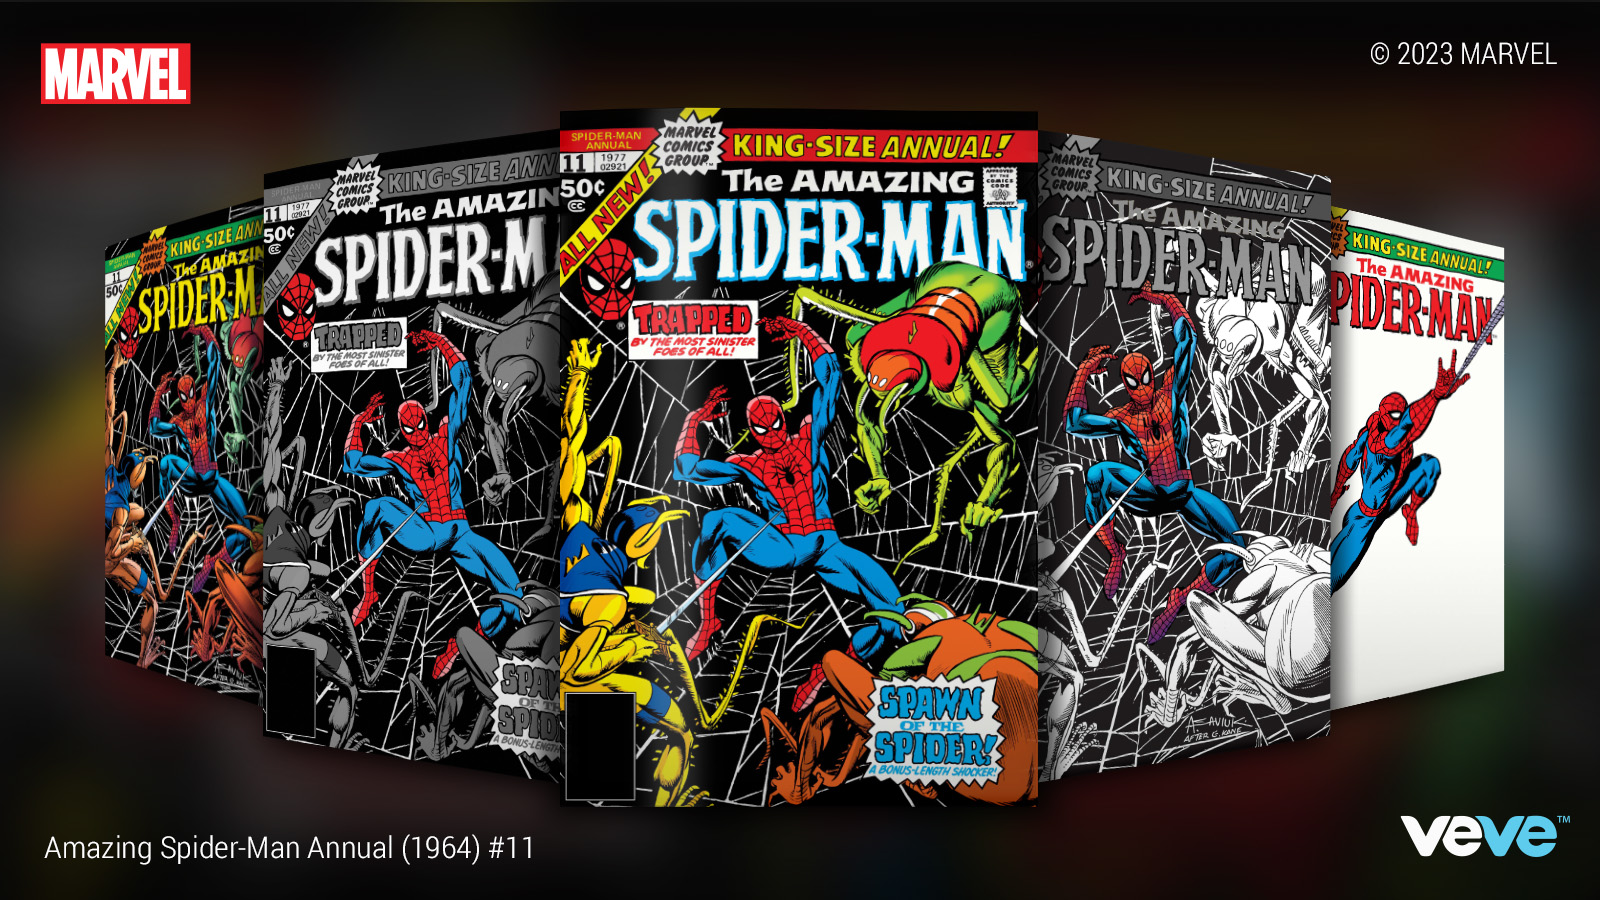 VeVe  Digital Collectibles on X: The first Marvel work of superstar  artist John Romita Jr.! @Marvel's Amazing Spider-Man Annual (1964) #11  features VeVe-Exclusive Rare & Ultra Rare covers by Alex Saviuk.